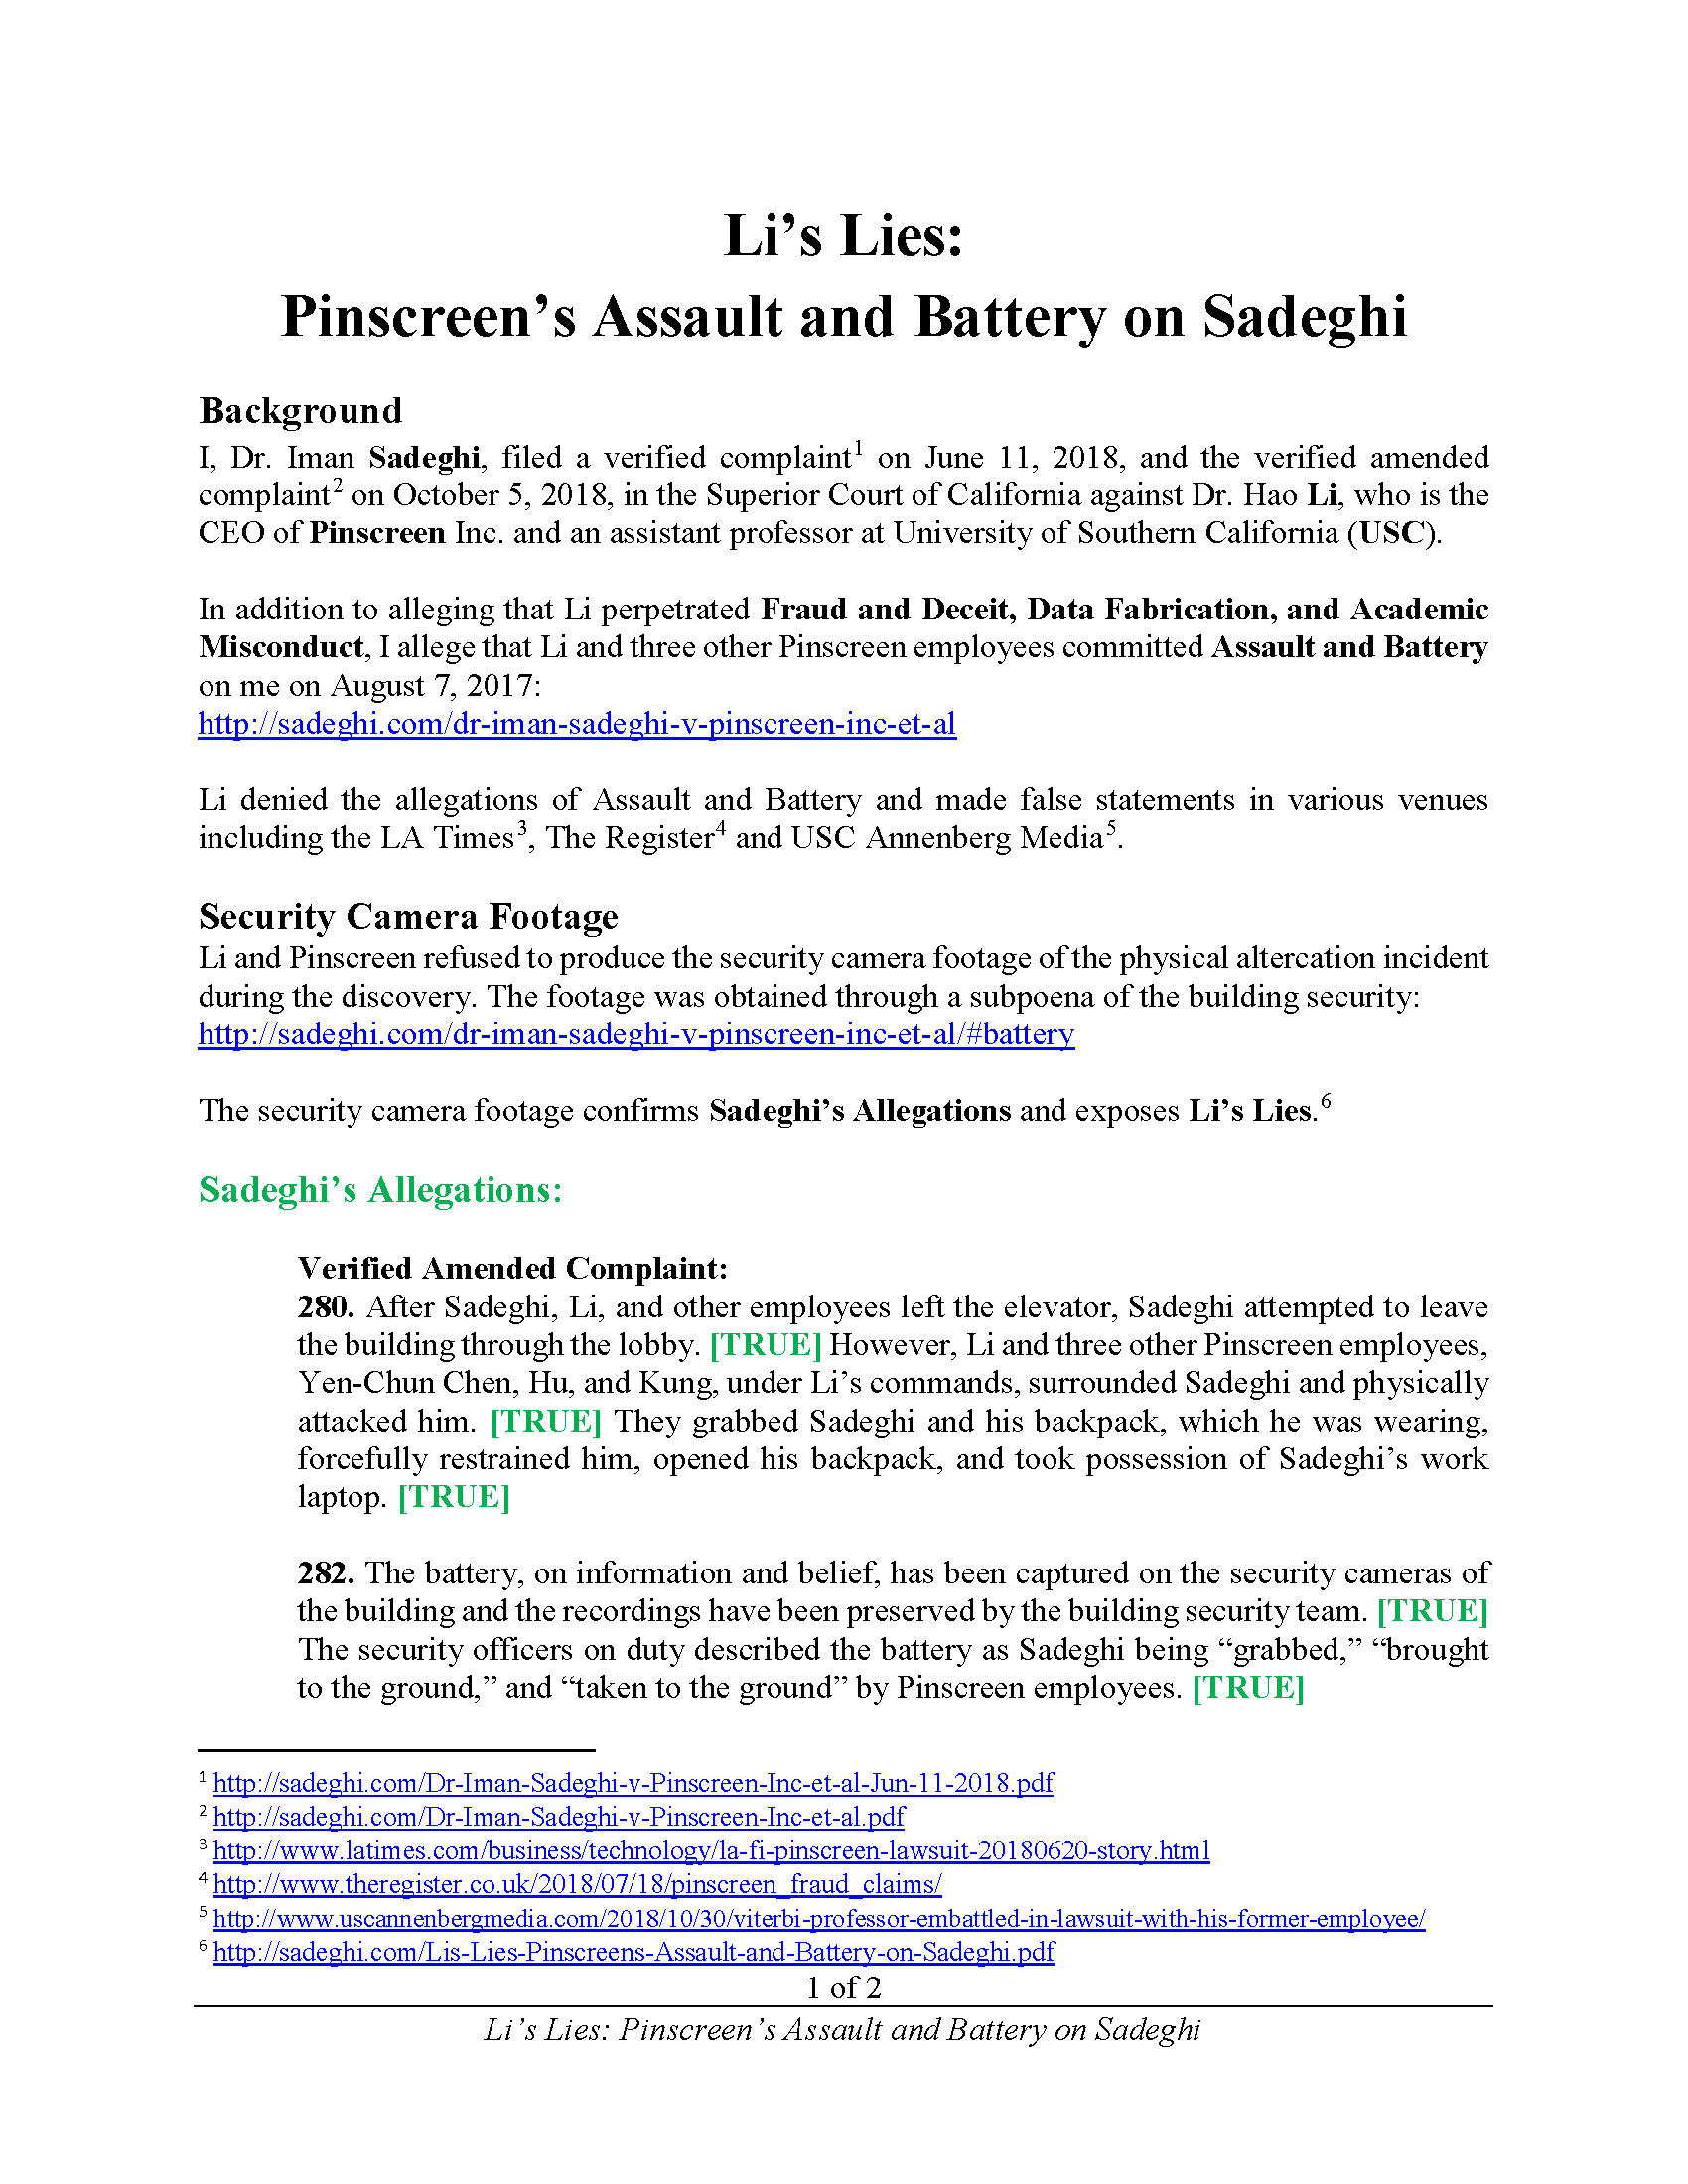 Pinscreen's Assault and Battery on Sadeghi Page 1